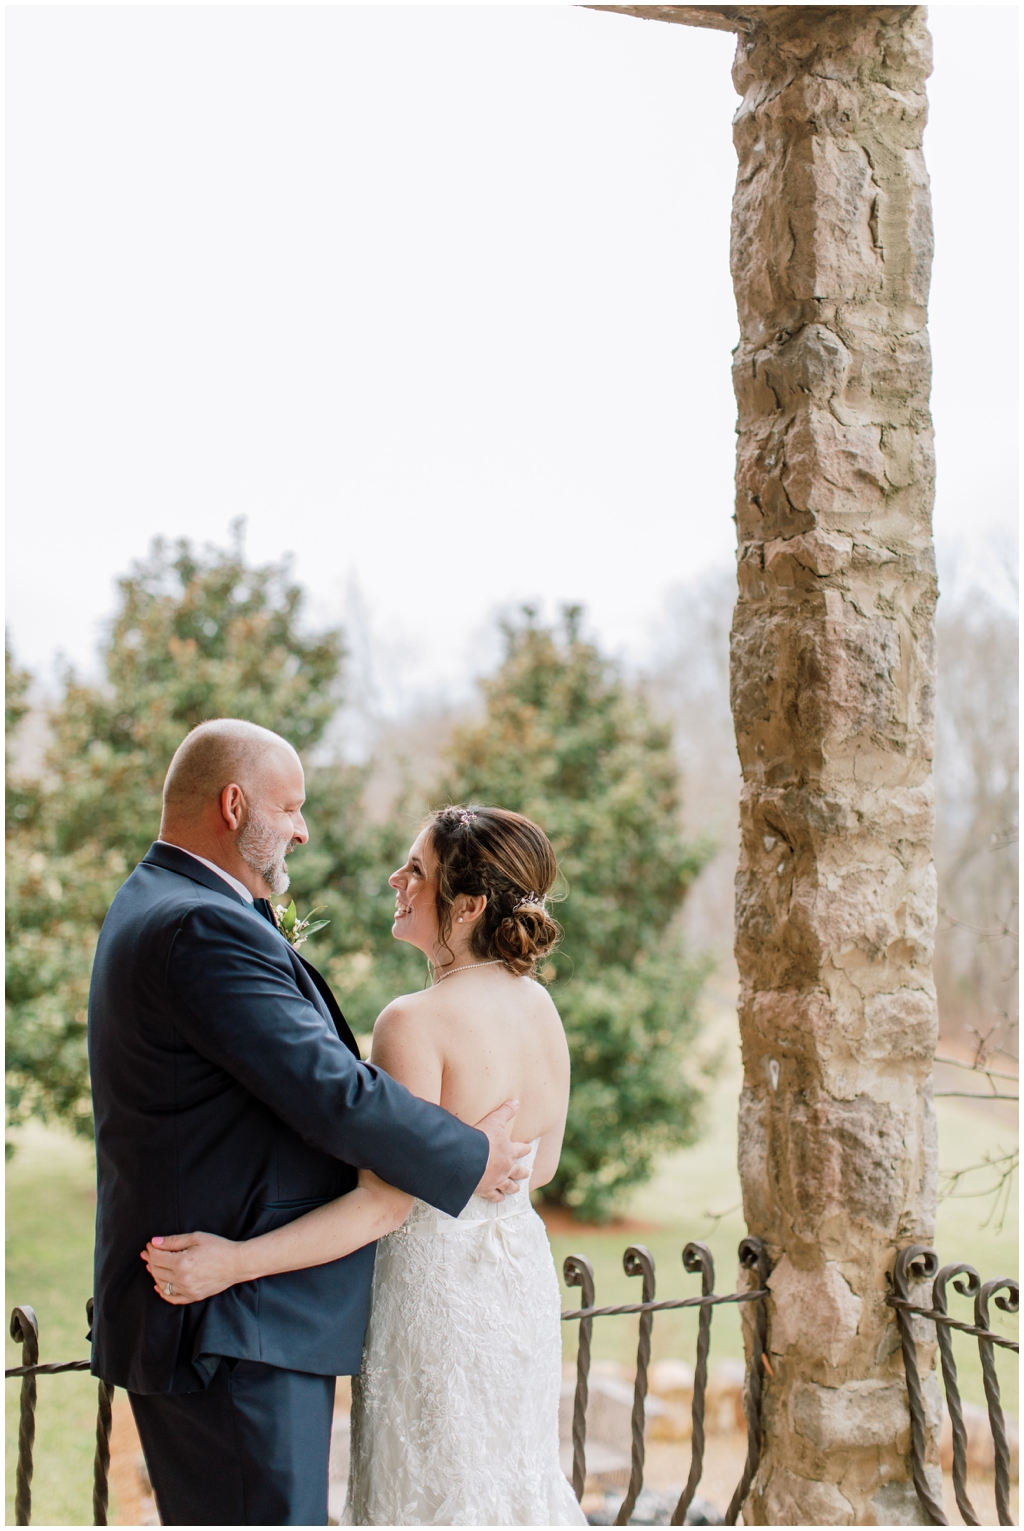 Winter wedding in east TN at Chateau Selah. Image by Holly Michon Photography.